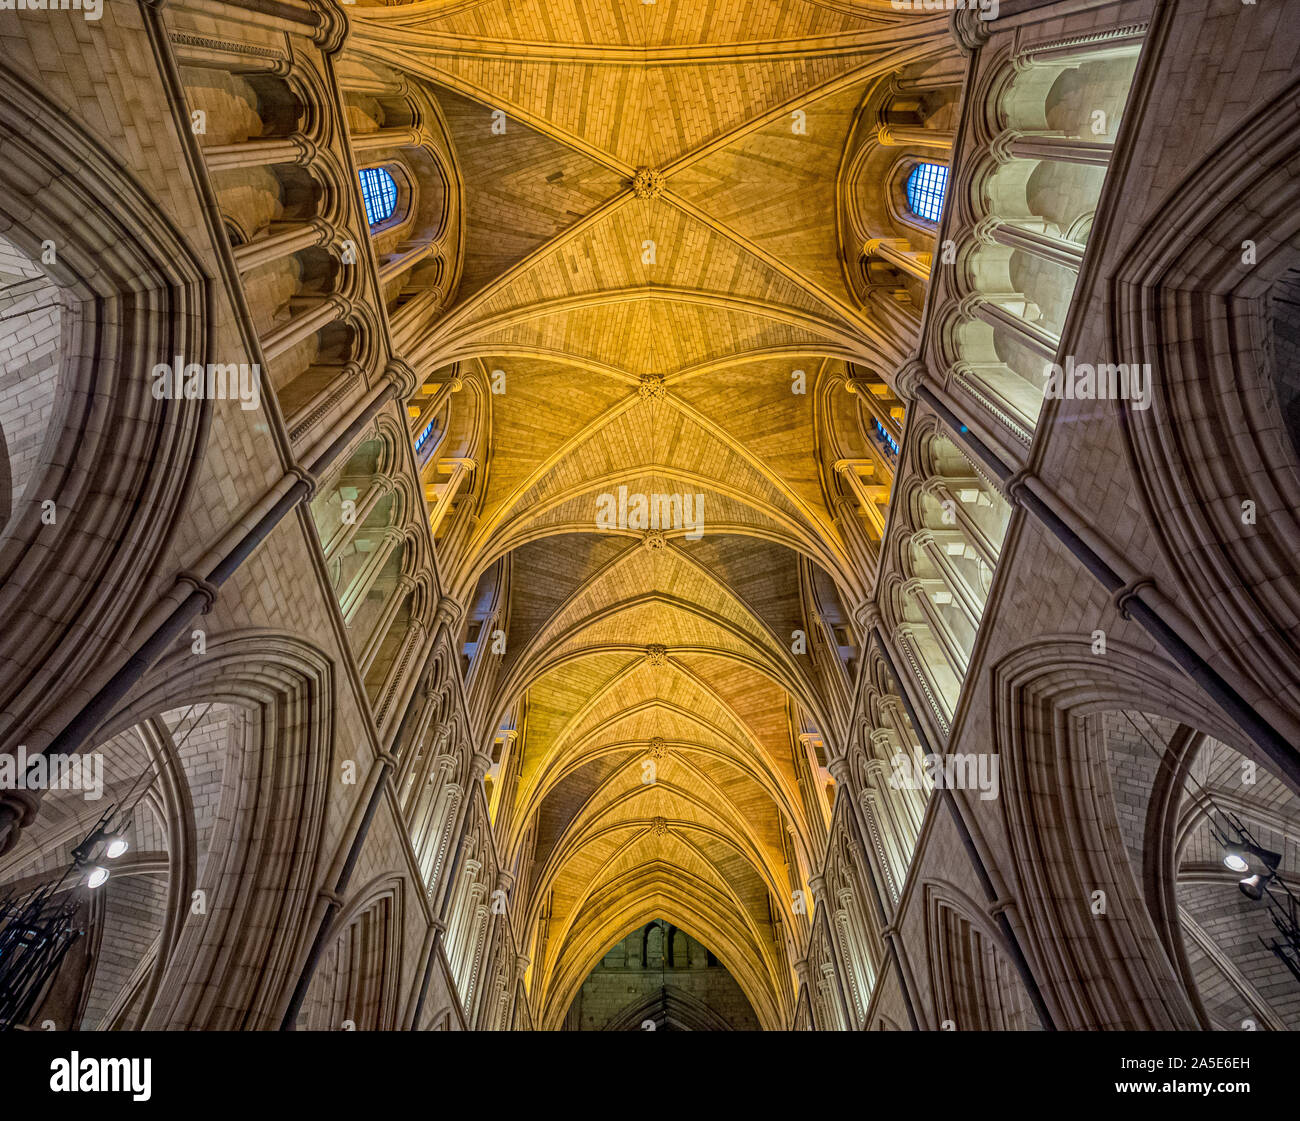 Interior of Southwark Cathedral (The Cathedral and Collegiate Church of St Saviour and St Mary Overie), Southwark, London, UK. Stock Photo